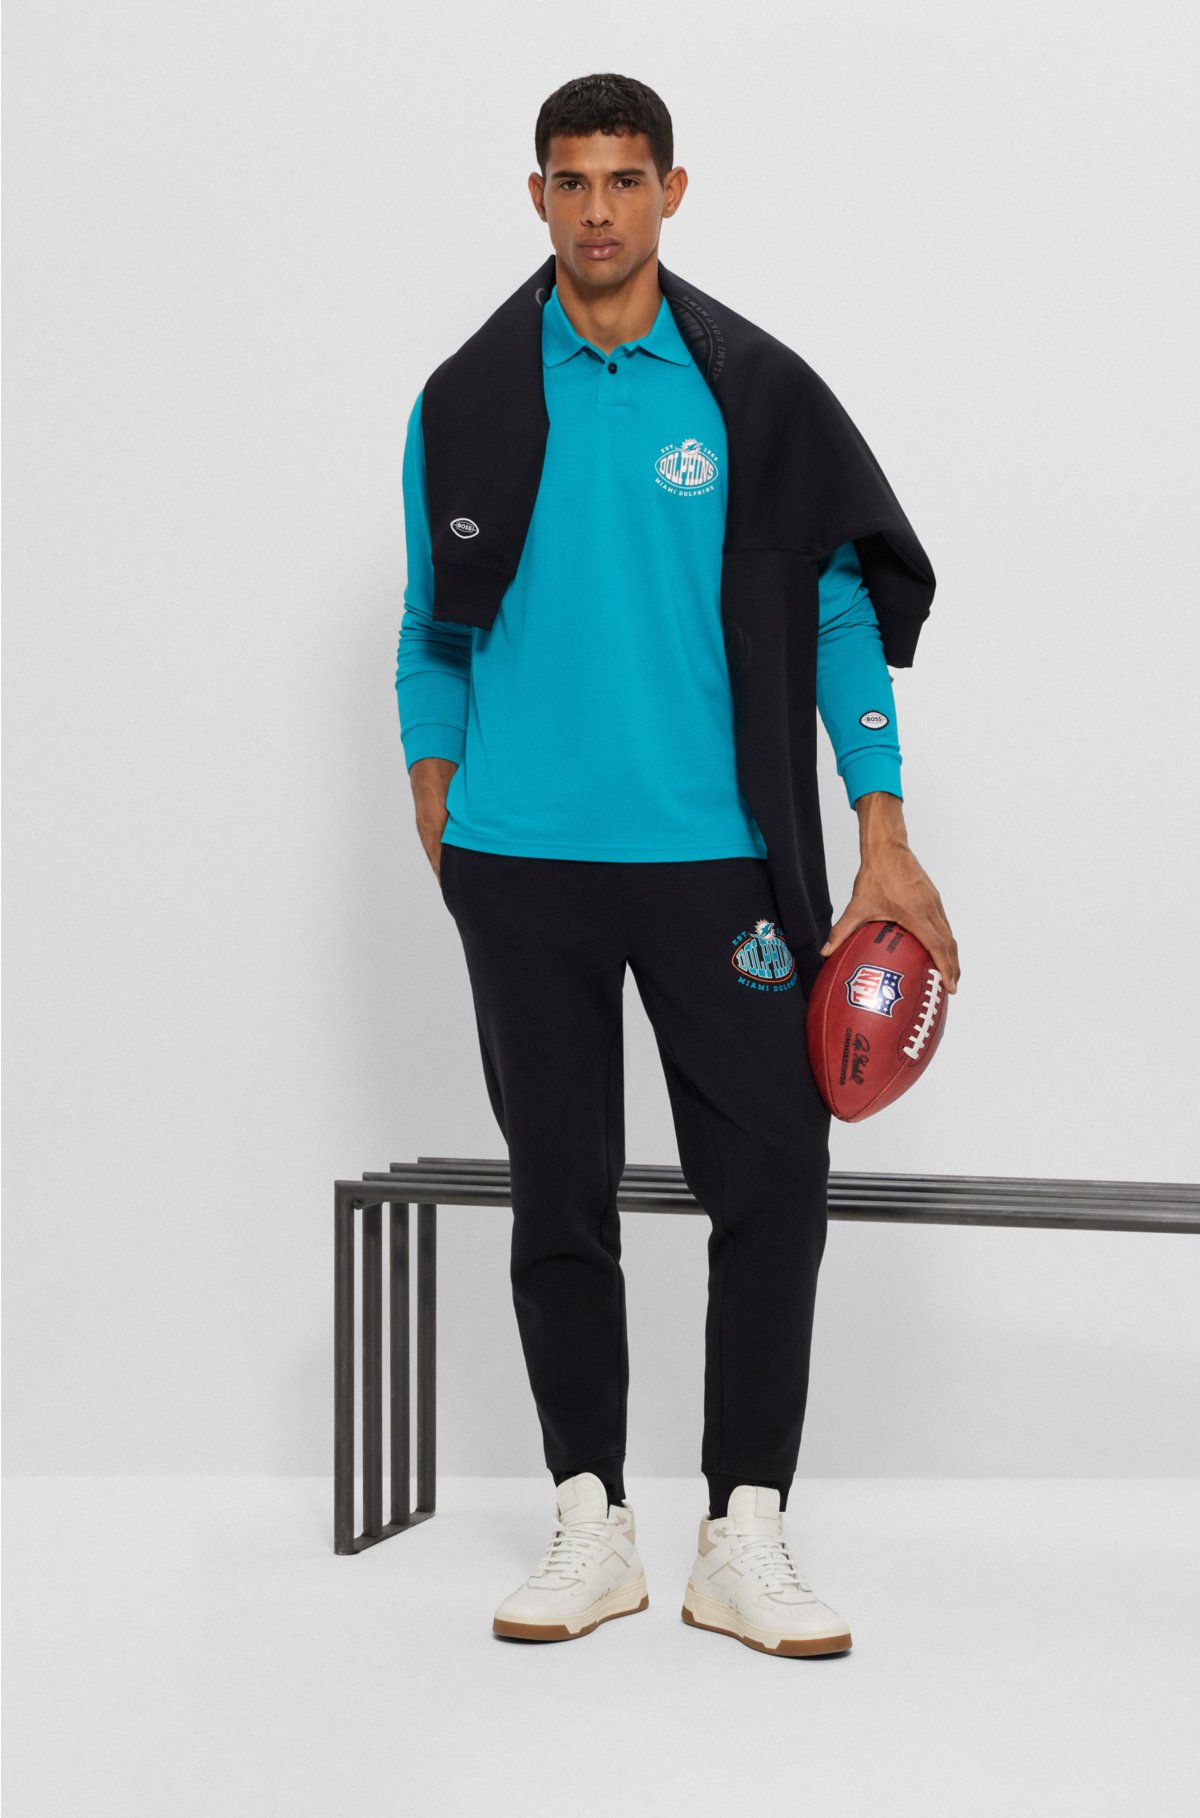 BOSS x NFL long-sleeved polo shirt with collaborative branding, Dolphins